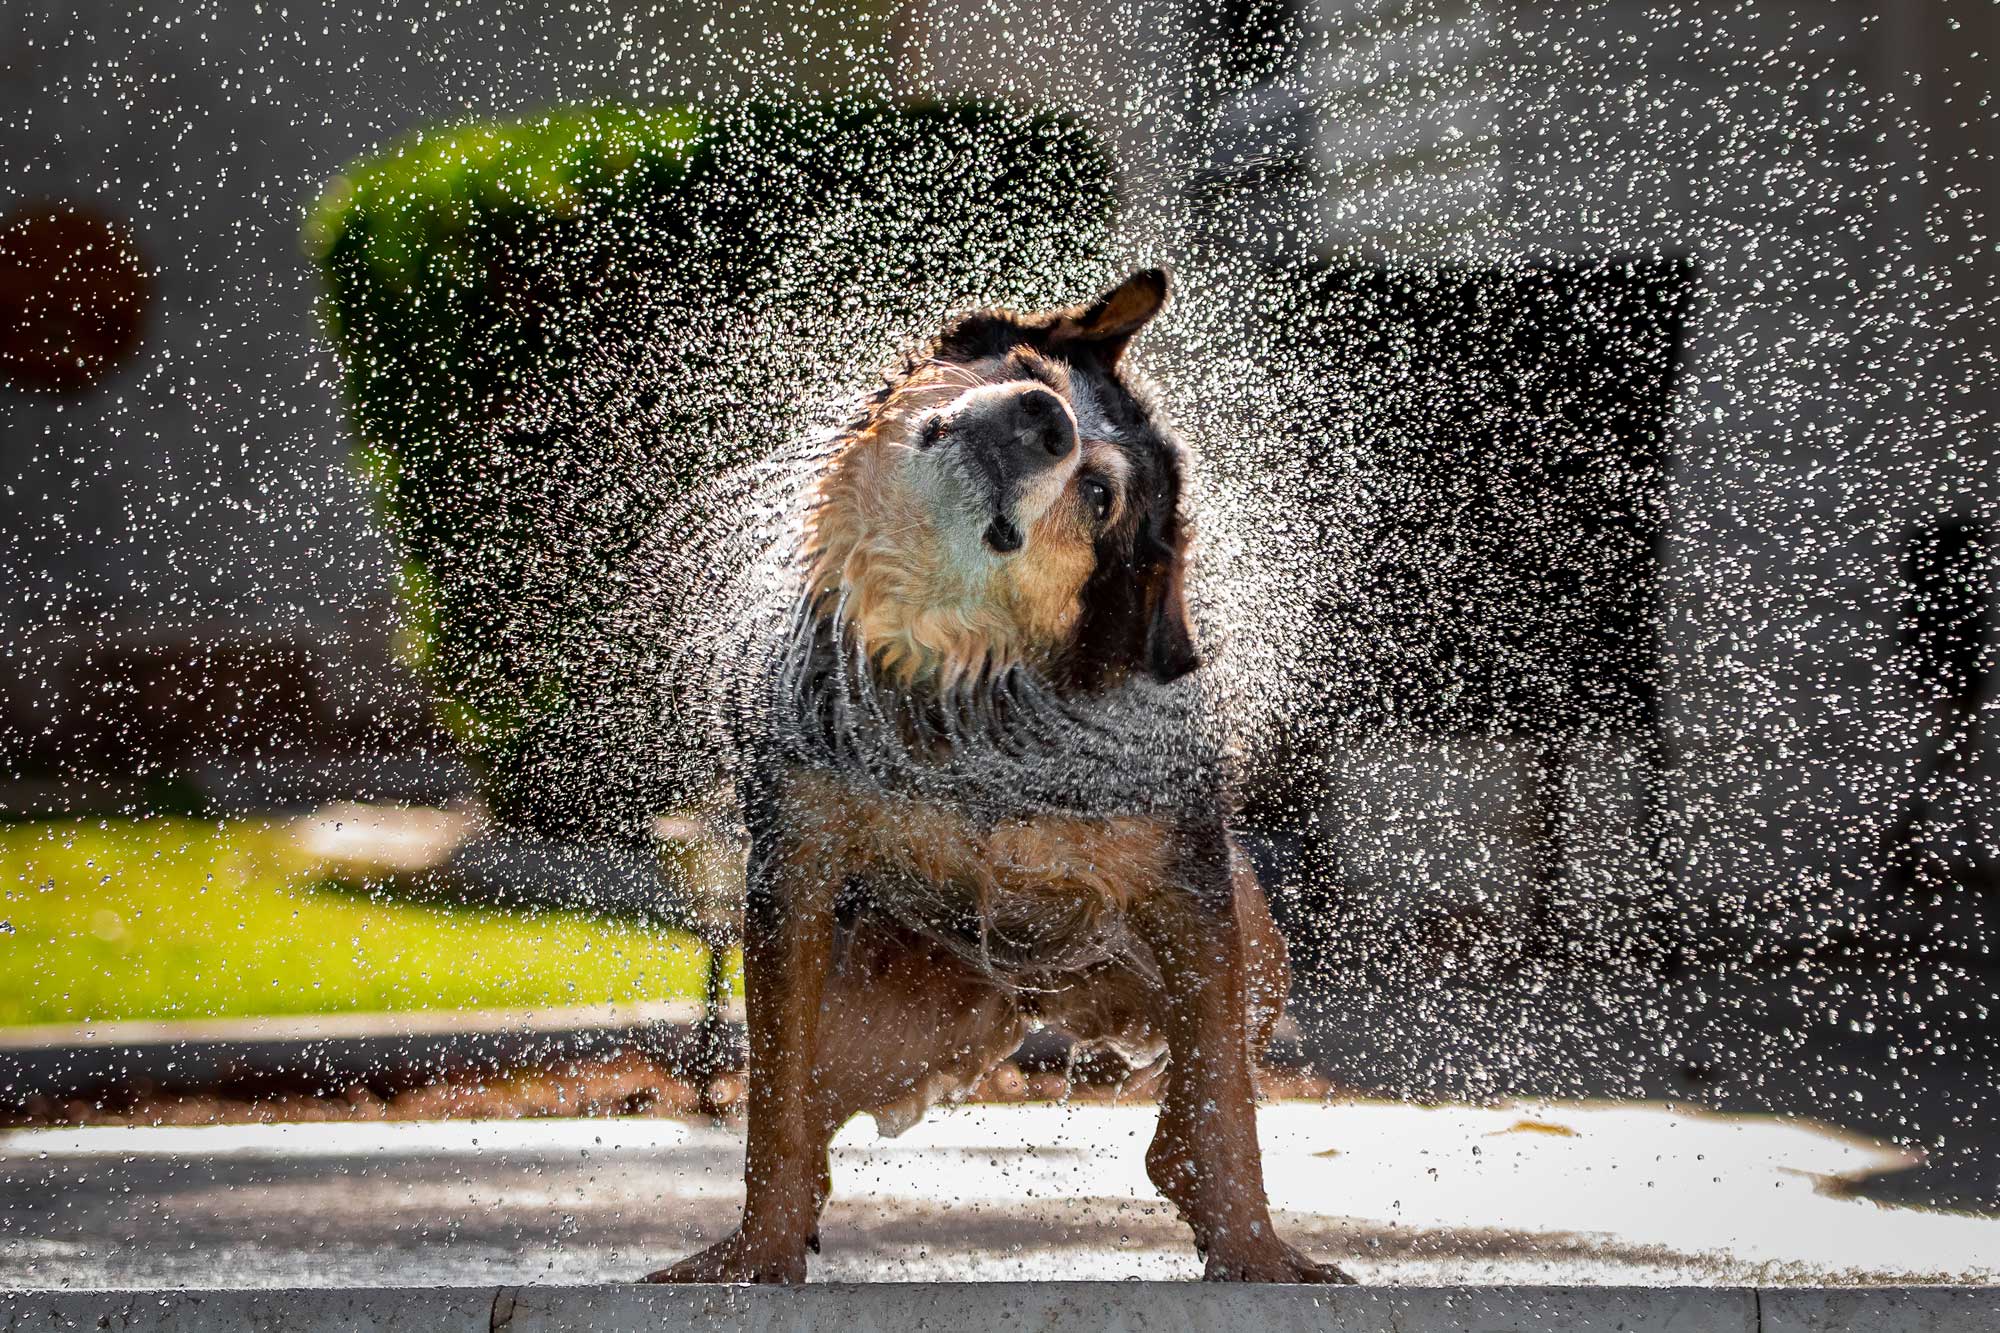 A wet dog shakes itself off and sprays water 